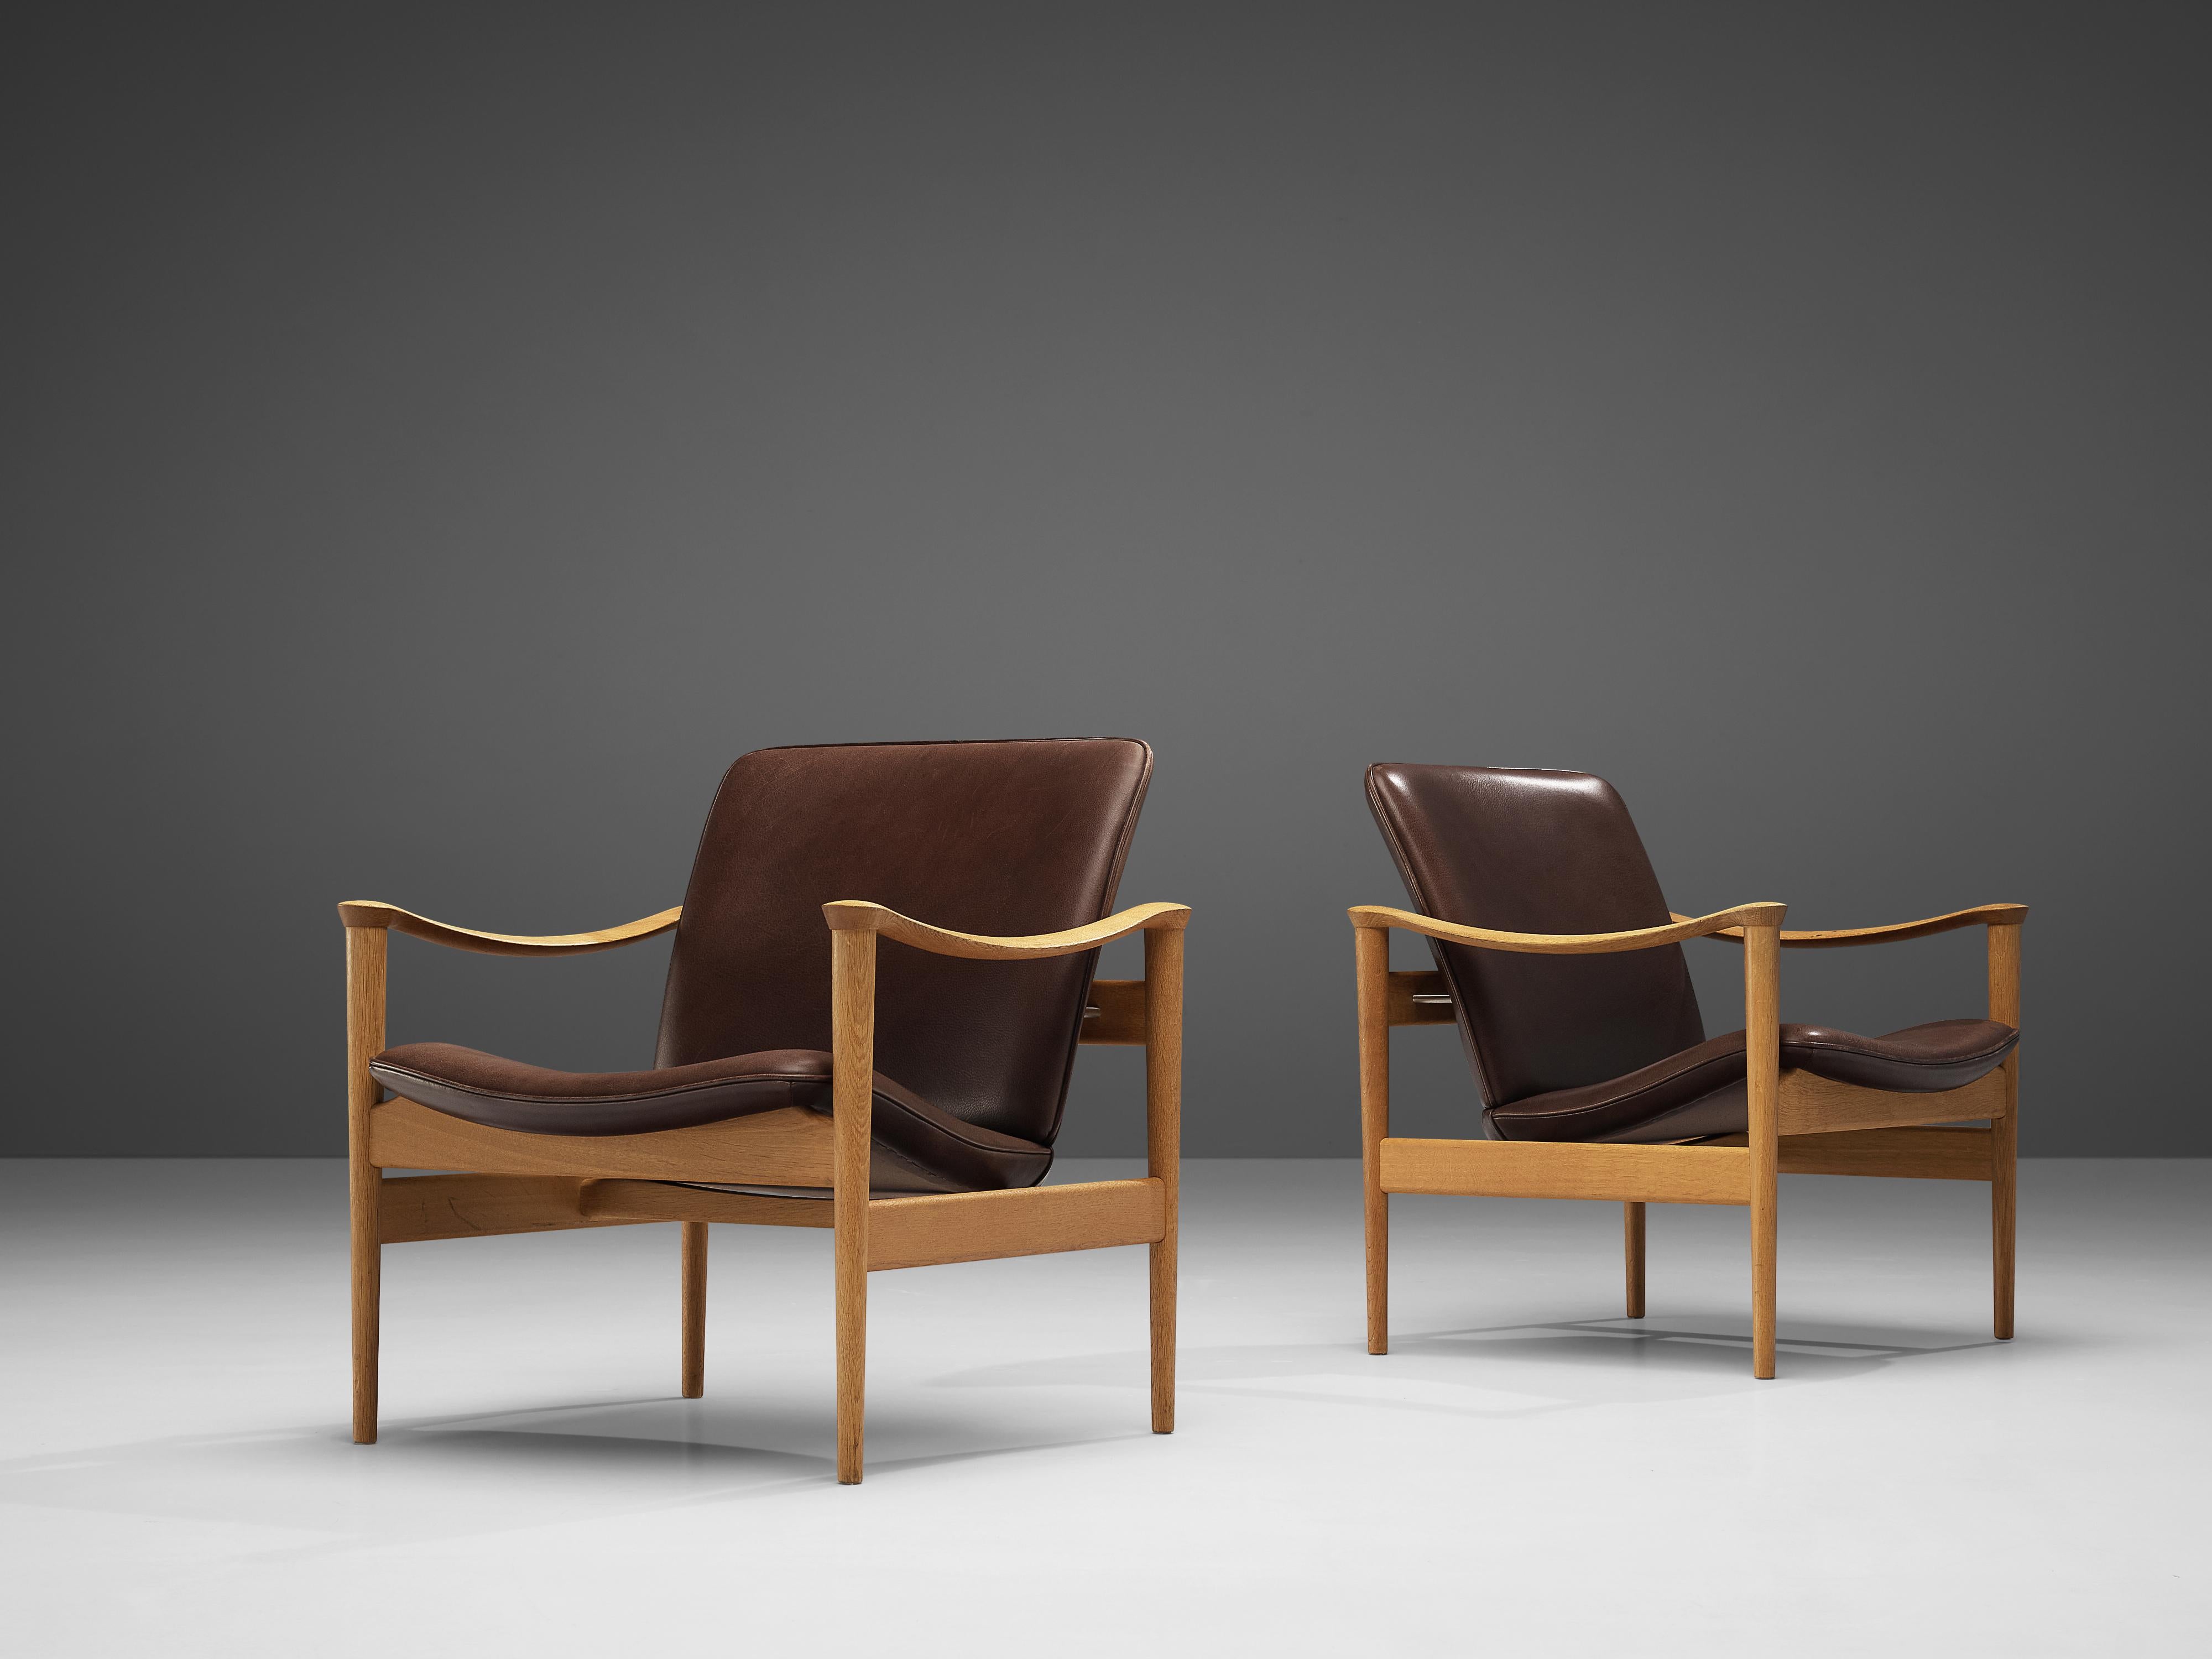 Fredrik A. Kayser for Vatne Lenestolfabrikk, armchairs model 711, oak, faux leather, Norway, 1960s

This set of chairs is designed by Frederik A. Kayser and executed by Vatne Lenestolfabrikk. The armchair is executed in oak, leatherette and are